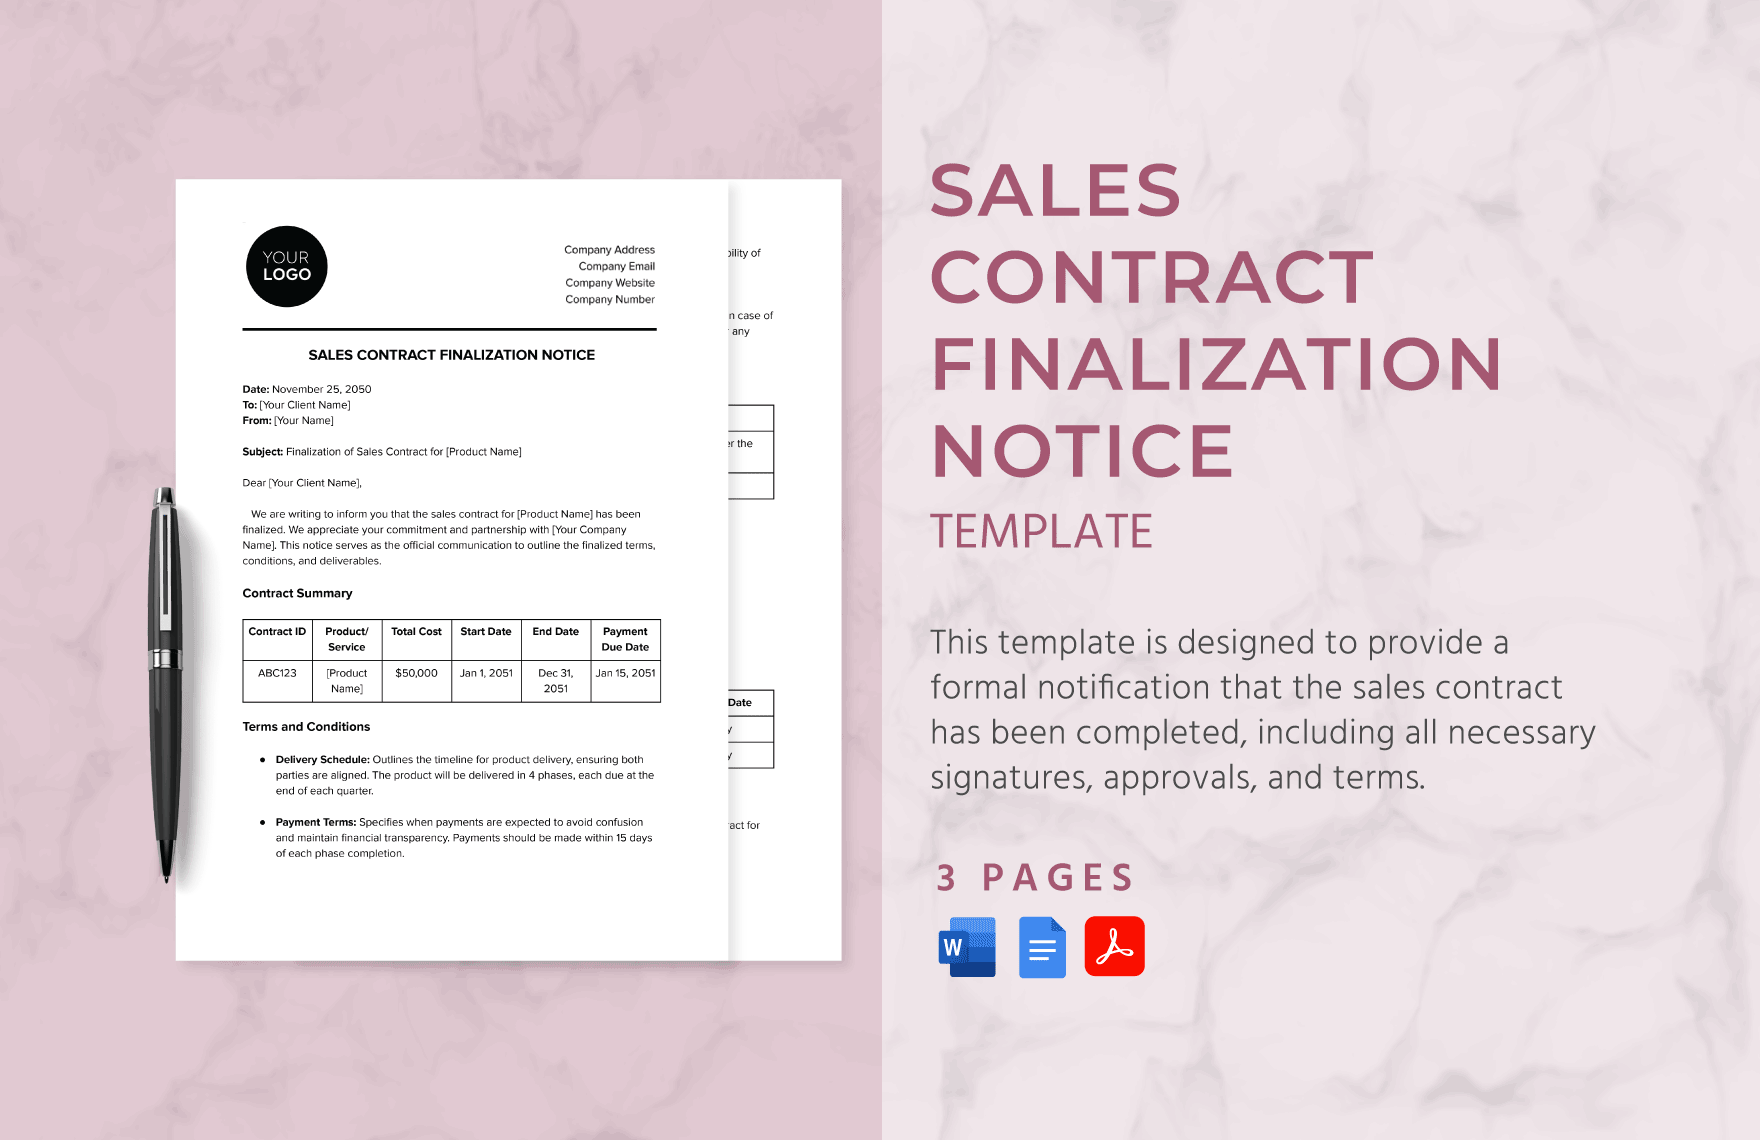 Sales Contract Finalization Notice Template